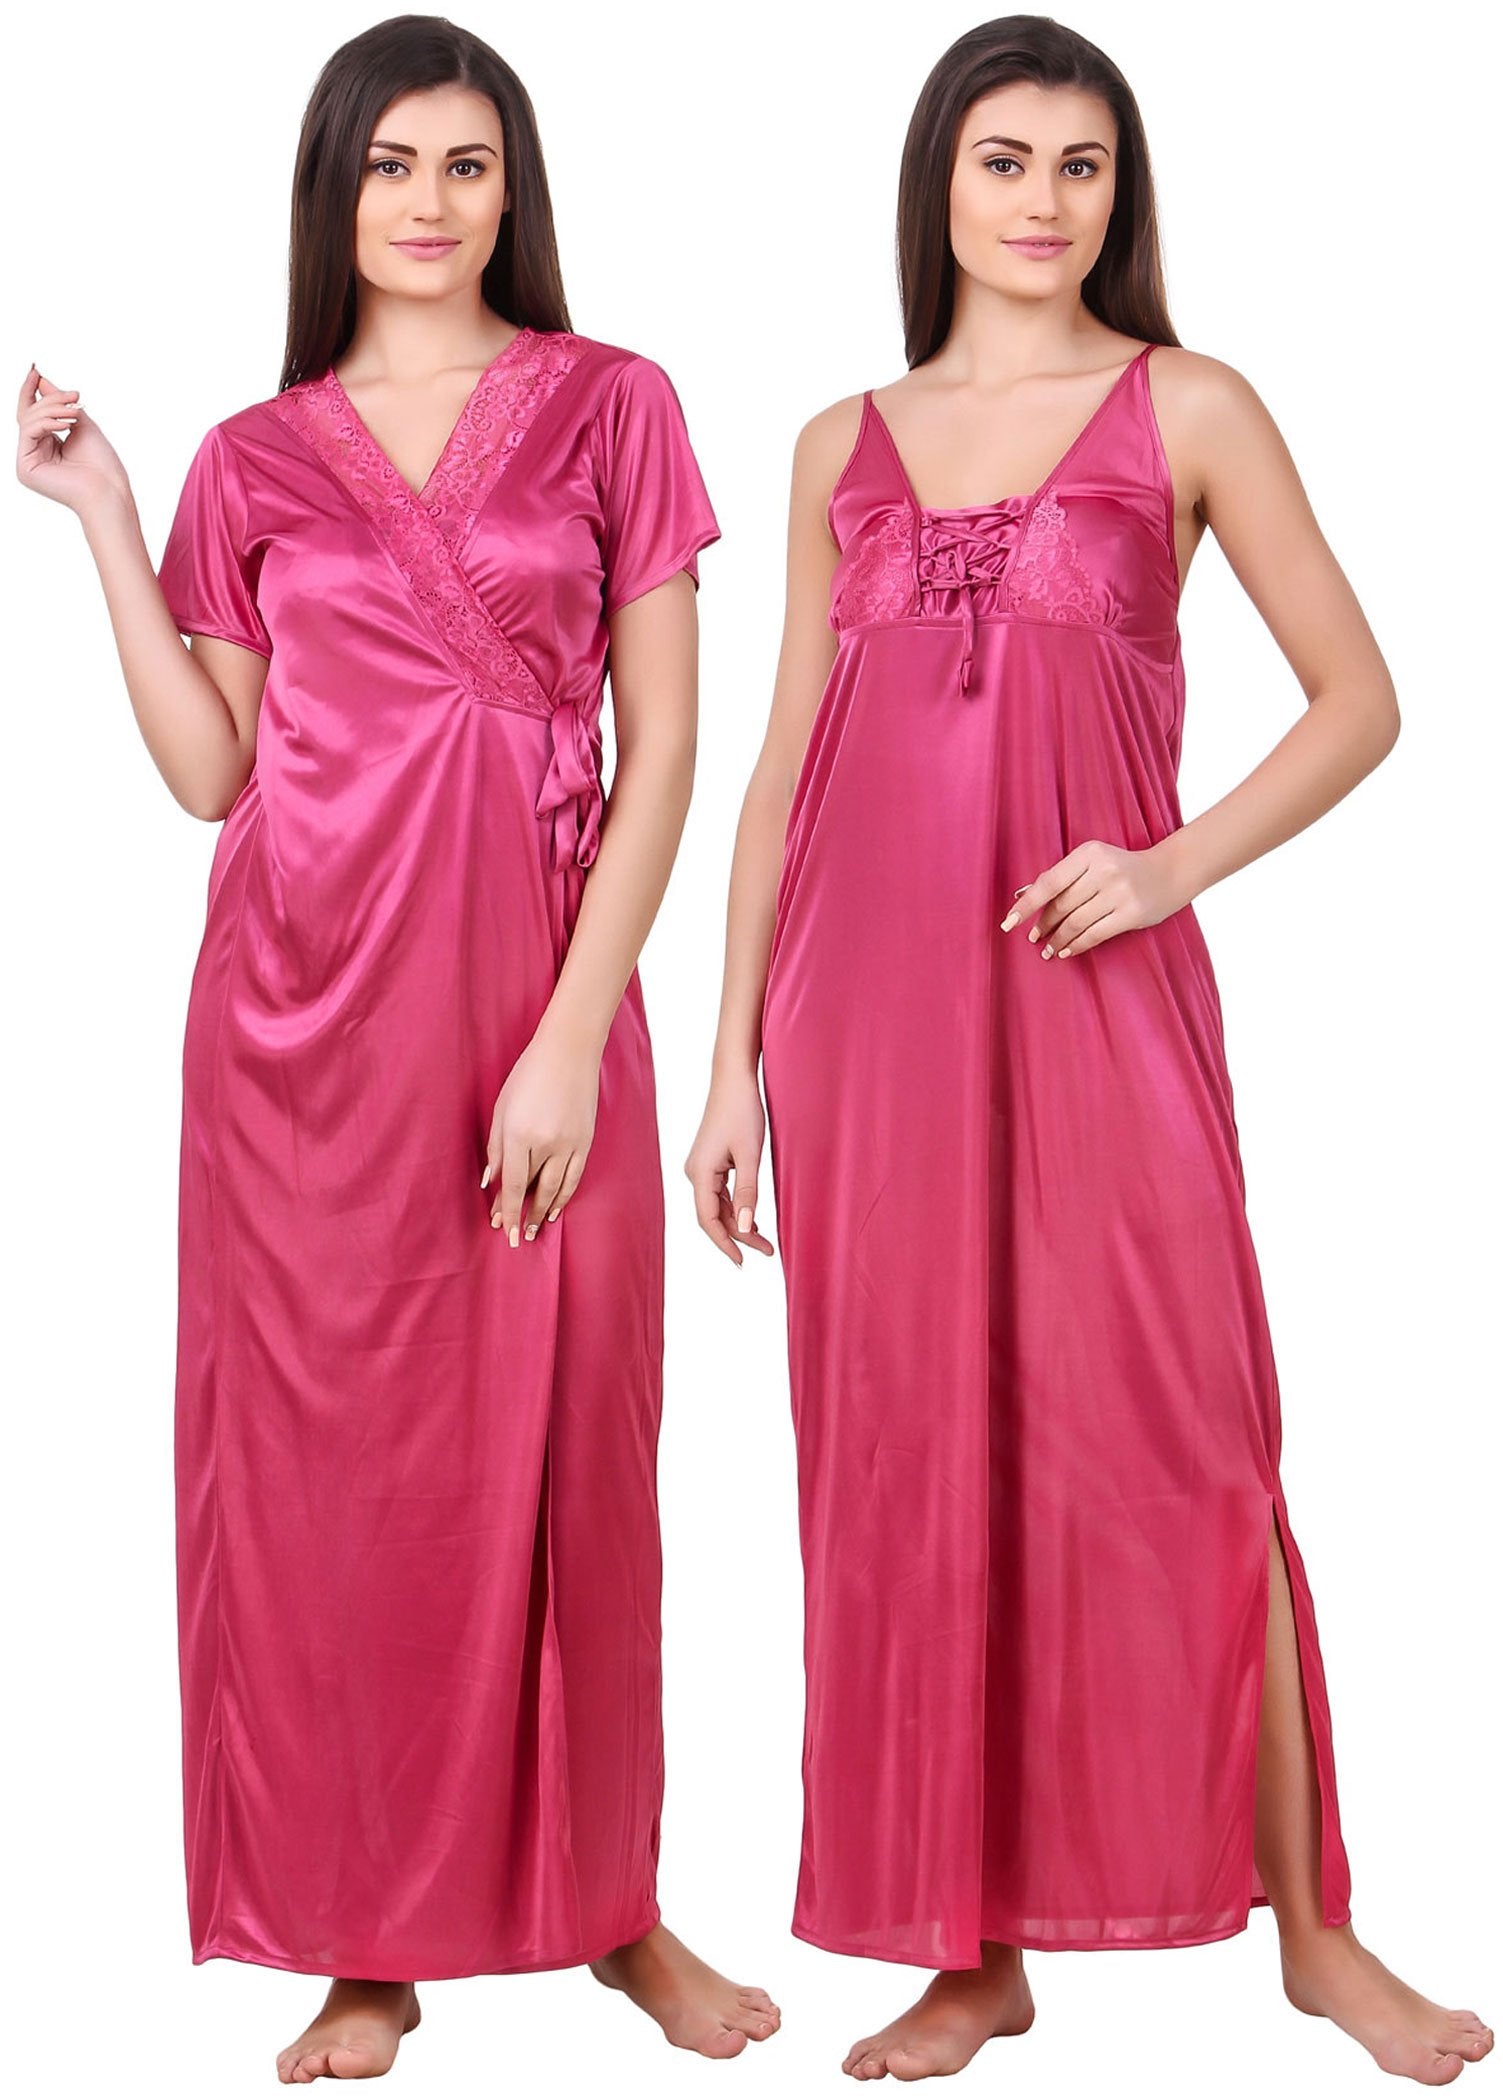 Pink / One Size Madison Plus size Nightgown and Robe Set Clearance The Orange Tags